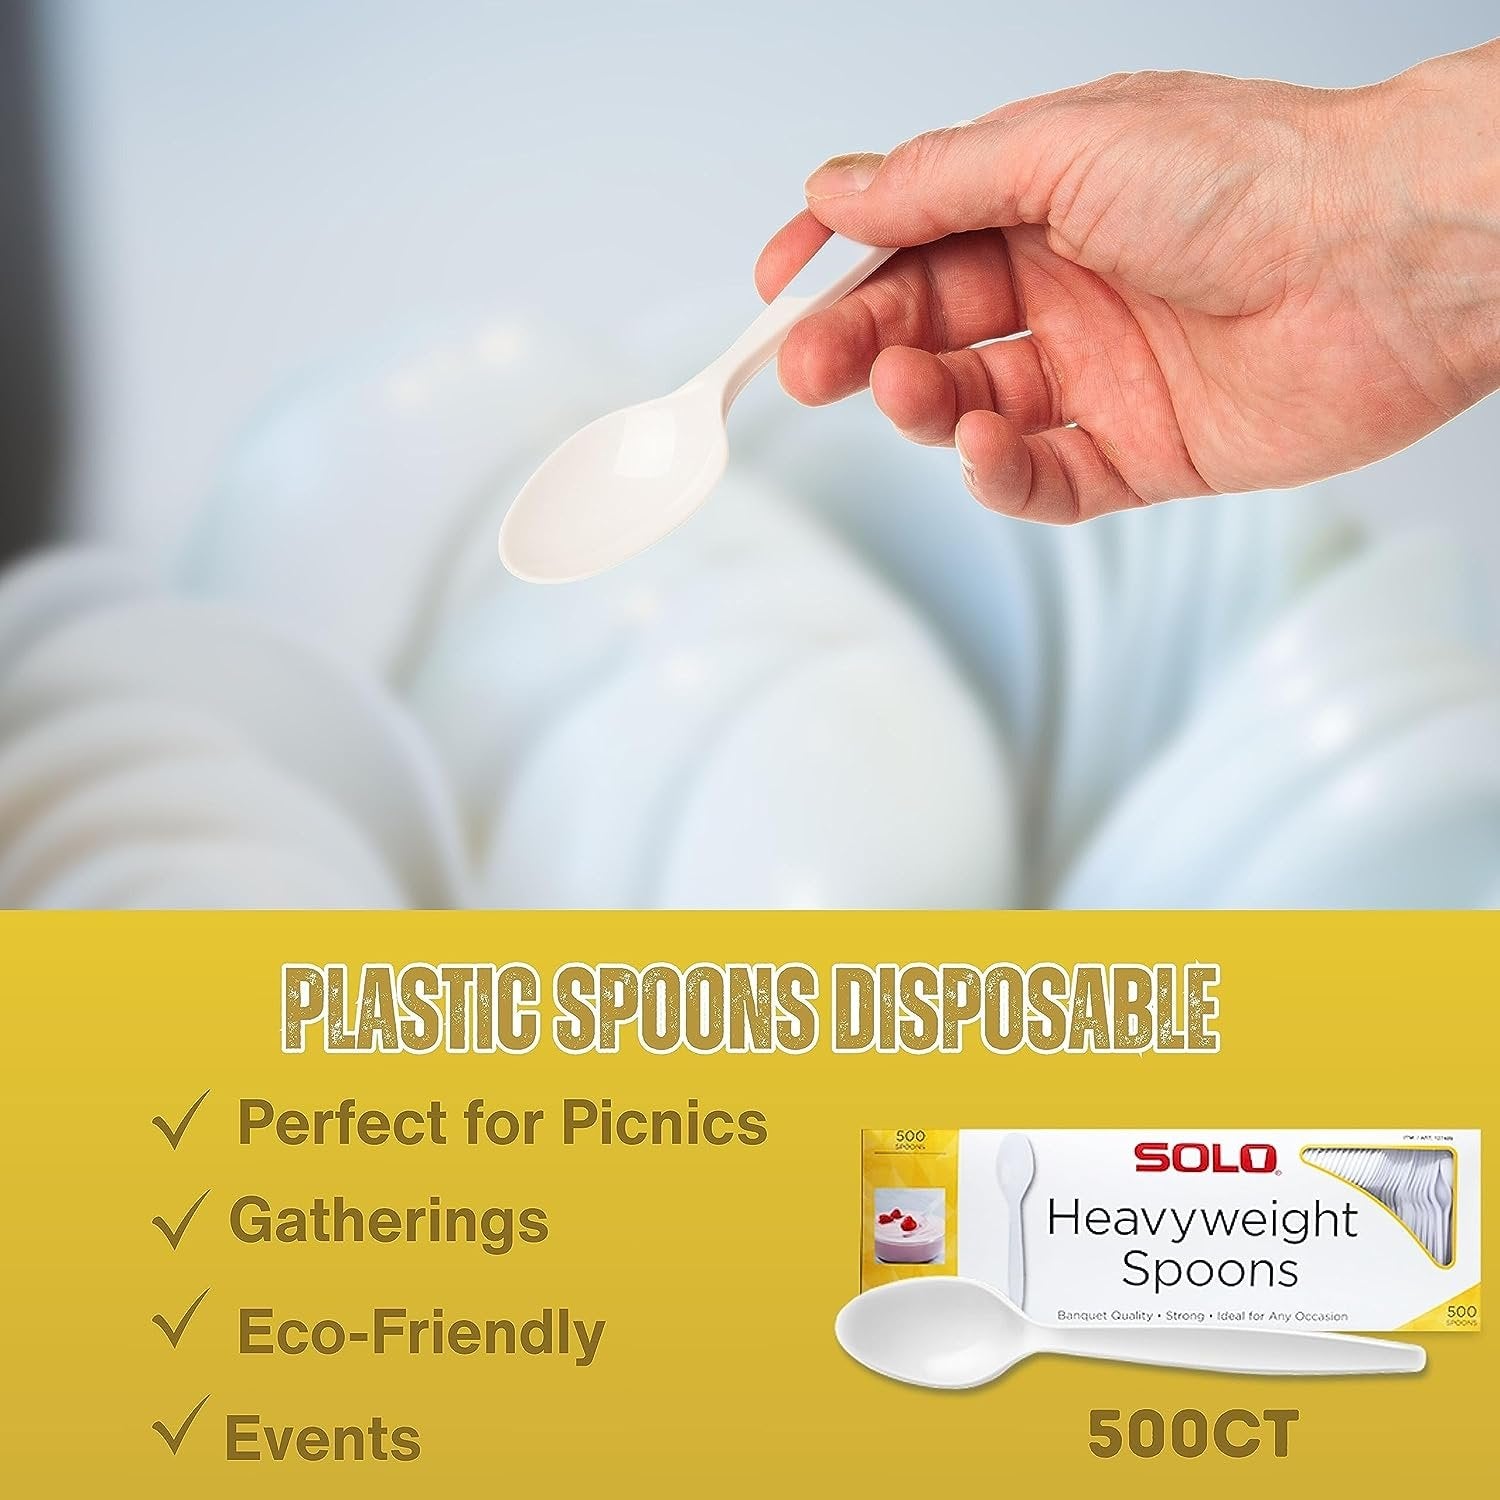 Worldwide Nutrition Bundle 2 Items - SOLO Heavy Duty Plastic Spoons and  Disposable Spoons Plastic Cutlery White Colored Plastic Spoons Bulk of 500